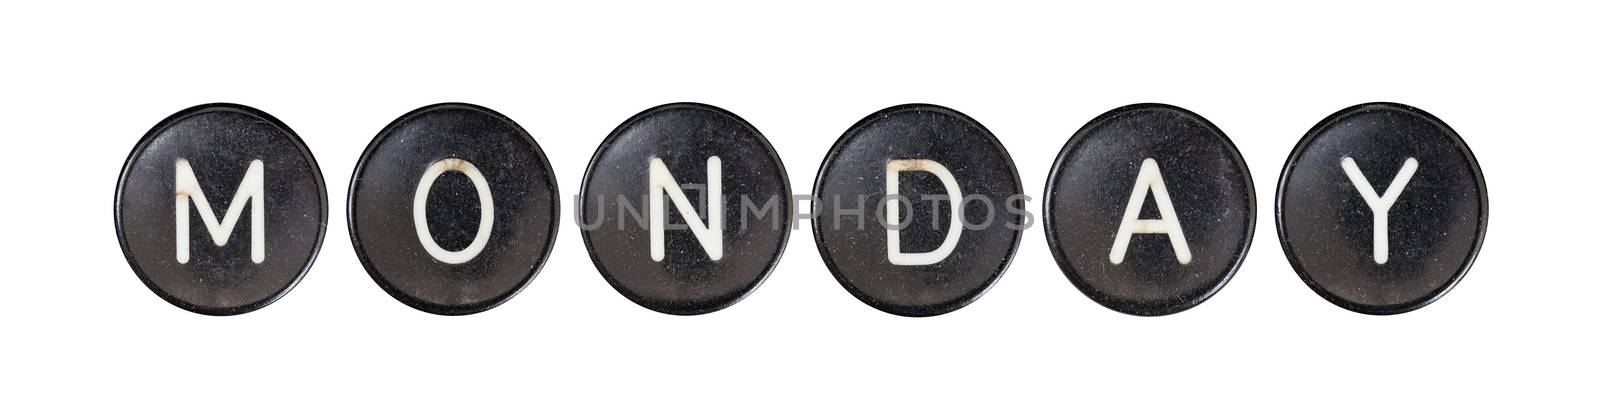 Typewriter buttons, isolated on white background - Monday